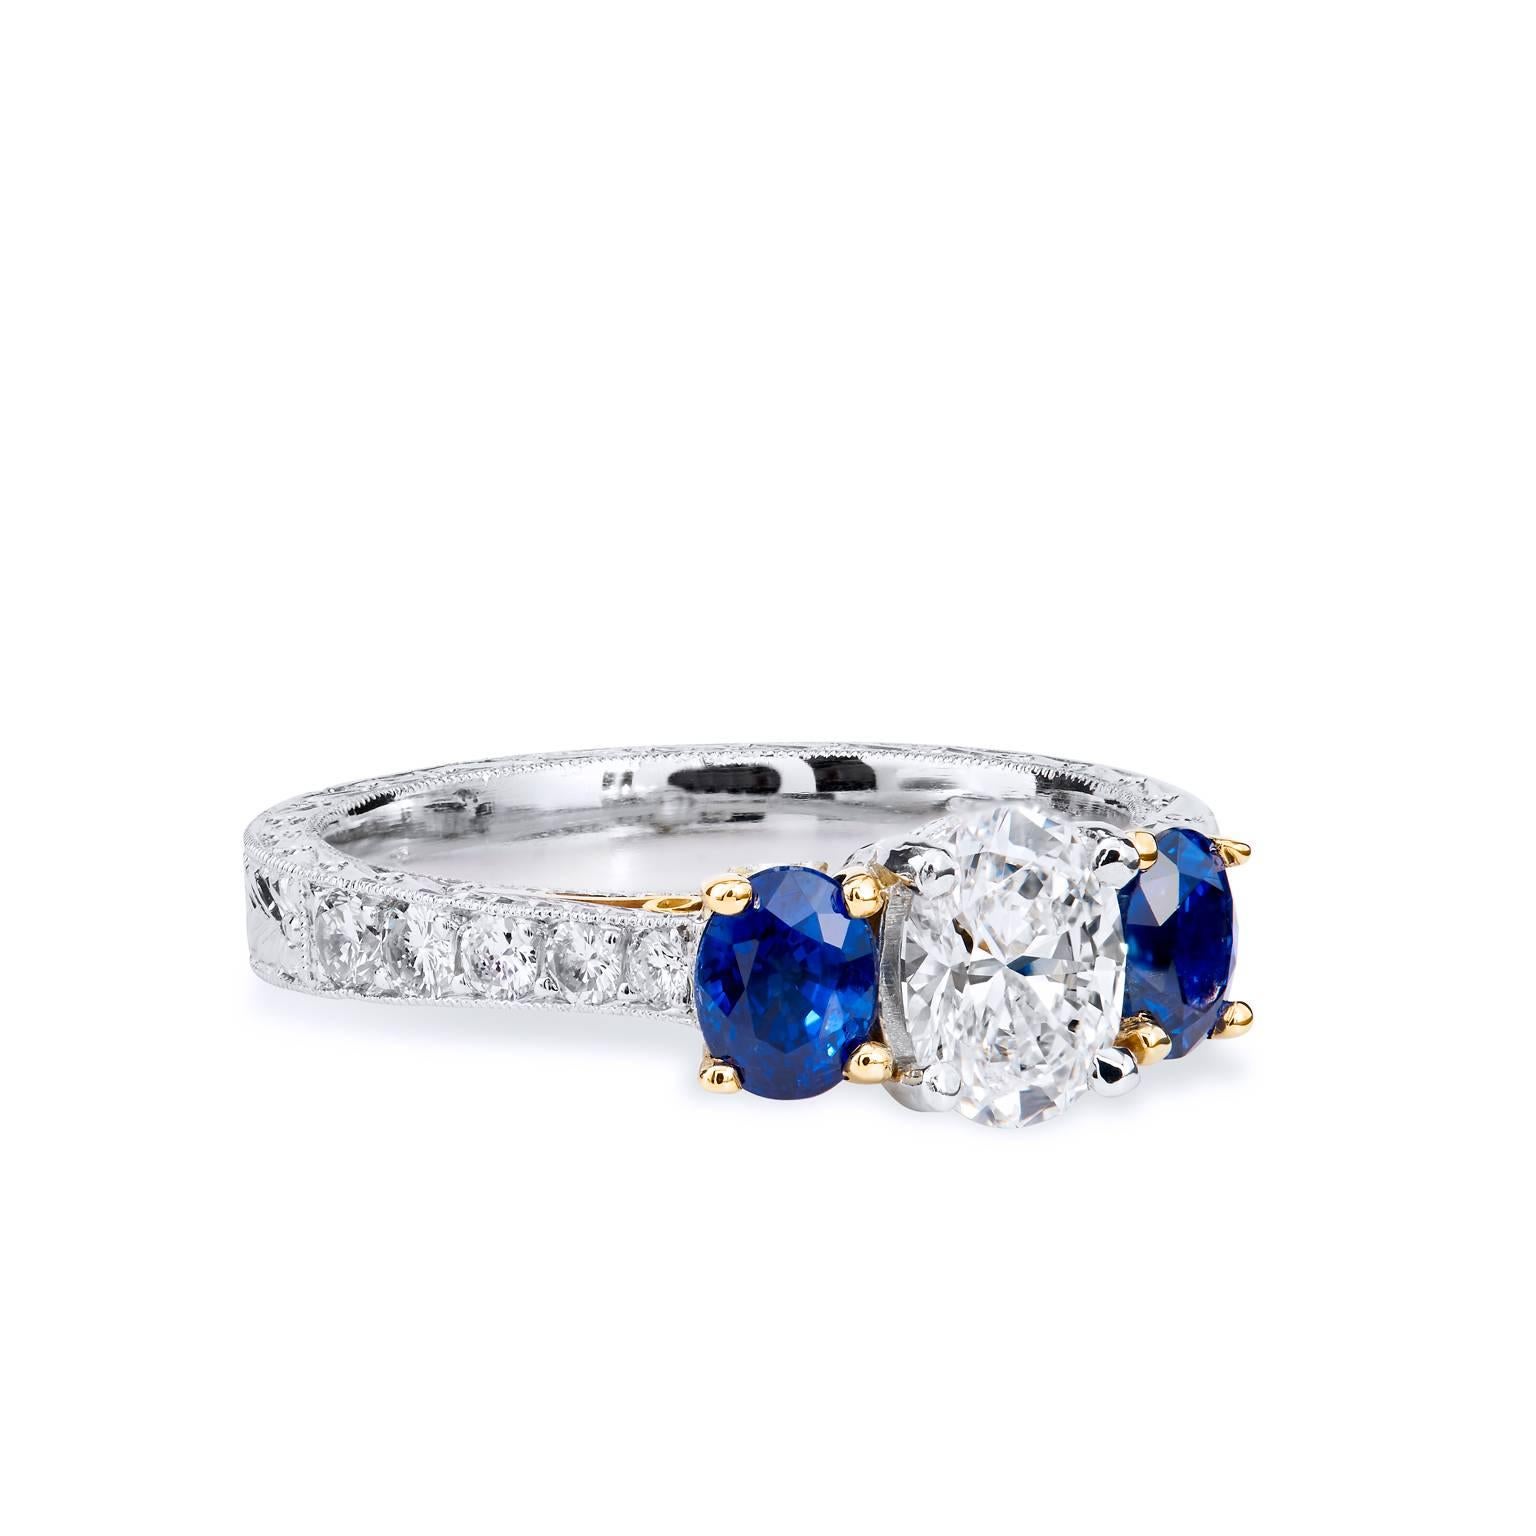 Set in platinum and 18kt yellow gold, this three stone ring showcases oval cut sapphires and diamonds, one of the hottest cuts of gemstones today. The center diamond is GIA certified and weighs .71ct D-VS1accented by two royal blue sapphires .60cts